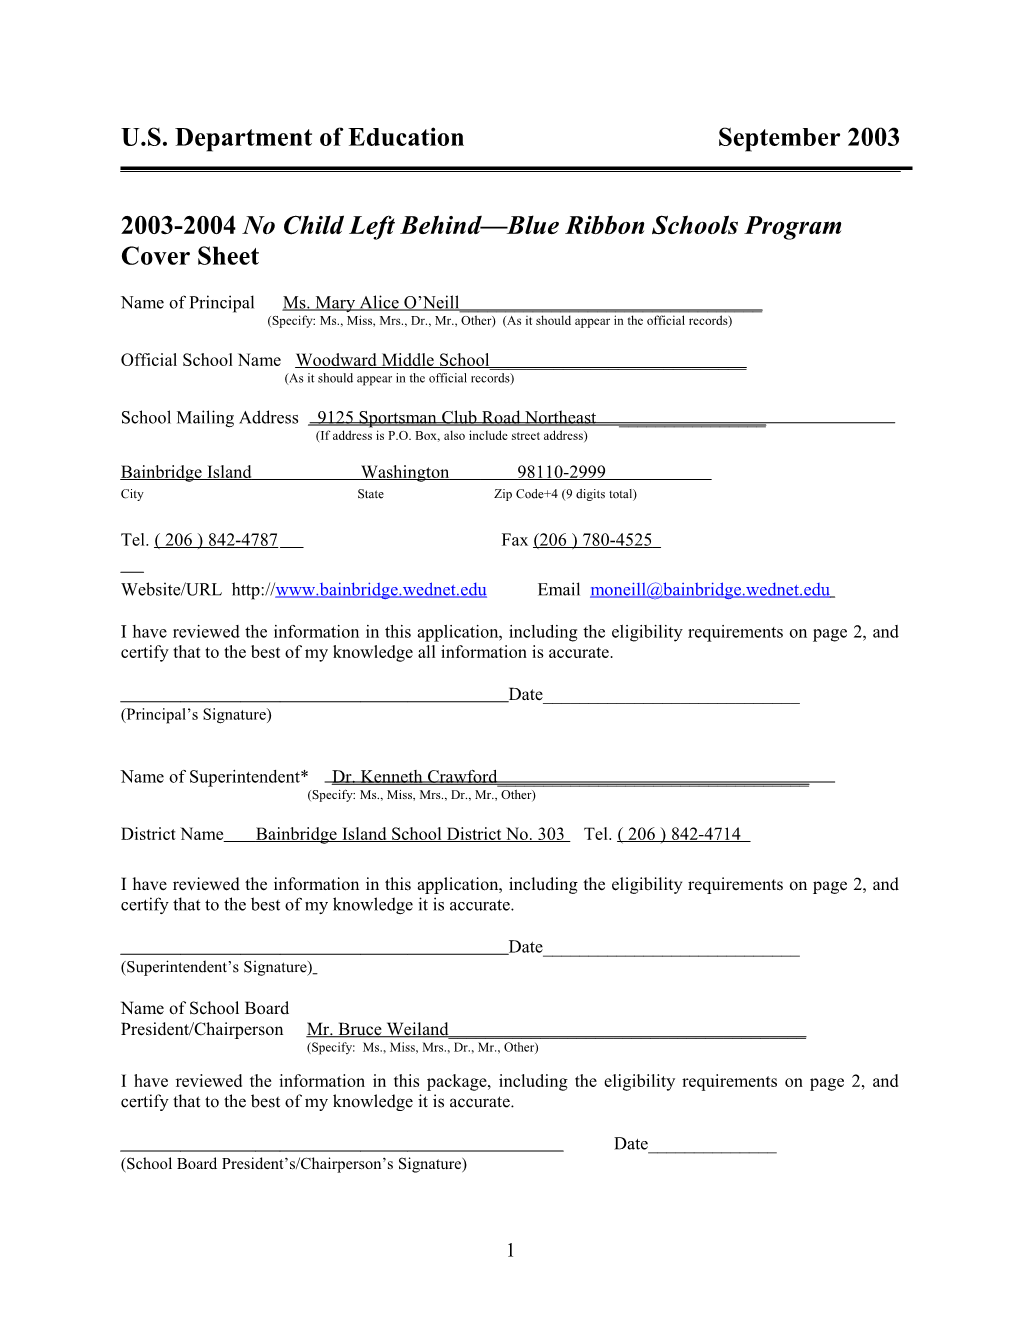 Woodward Middle School 2004 No Child Left Behind-Blue Ribbon School Application (Msword)